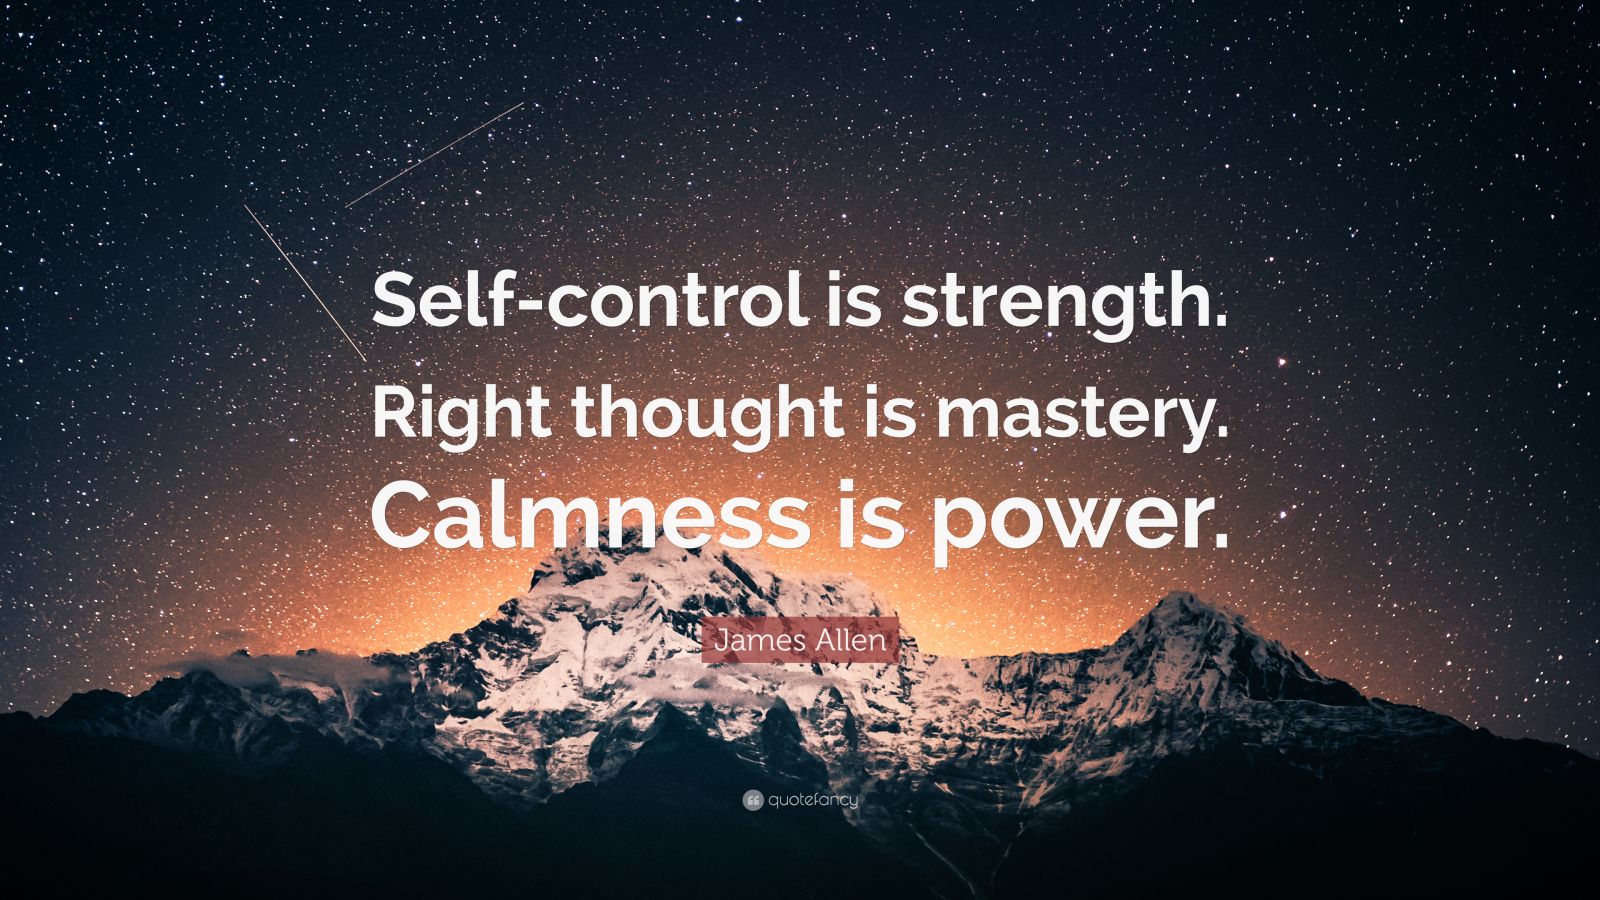 James Allen Quote: “Self-control is strength. Right thought is mastery